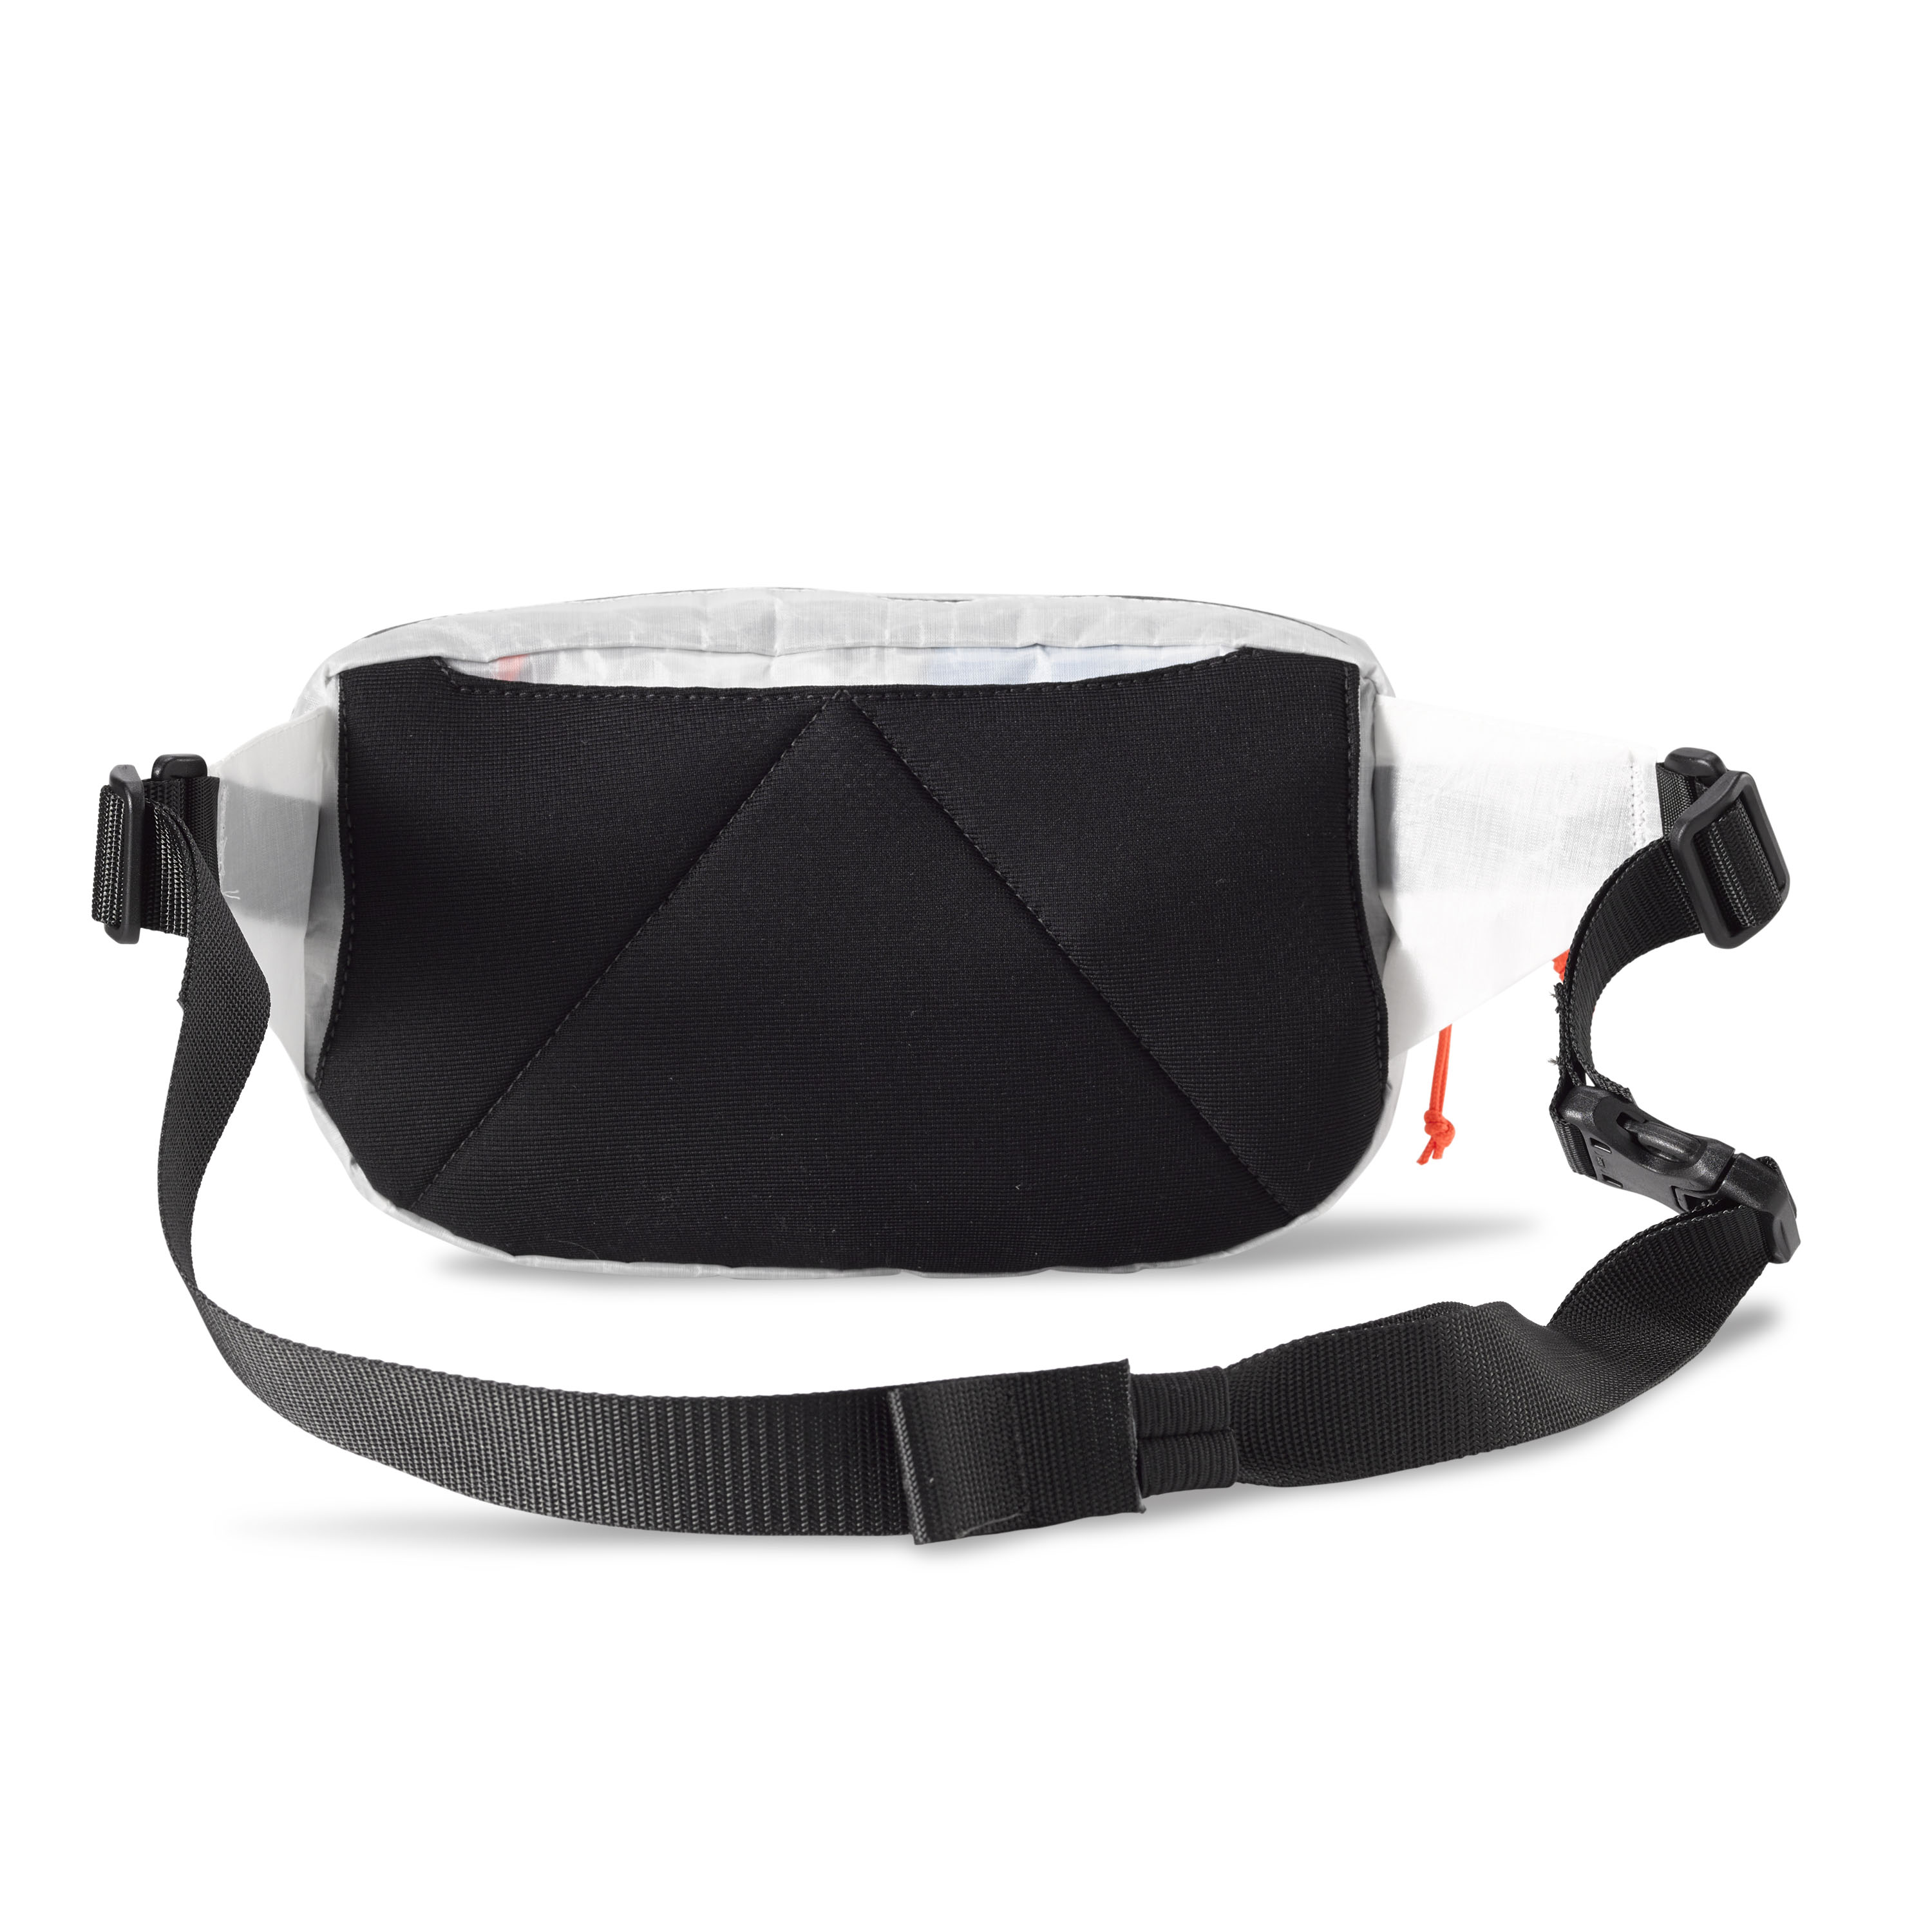 Versa Ultralight Fanny Pack and Pack Accessory | Hyperlite 